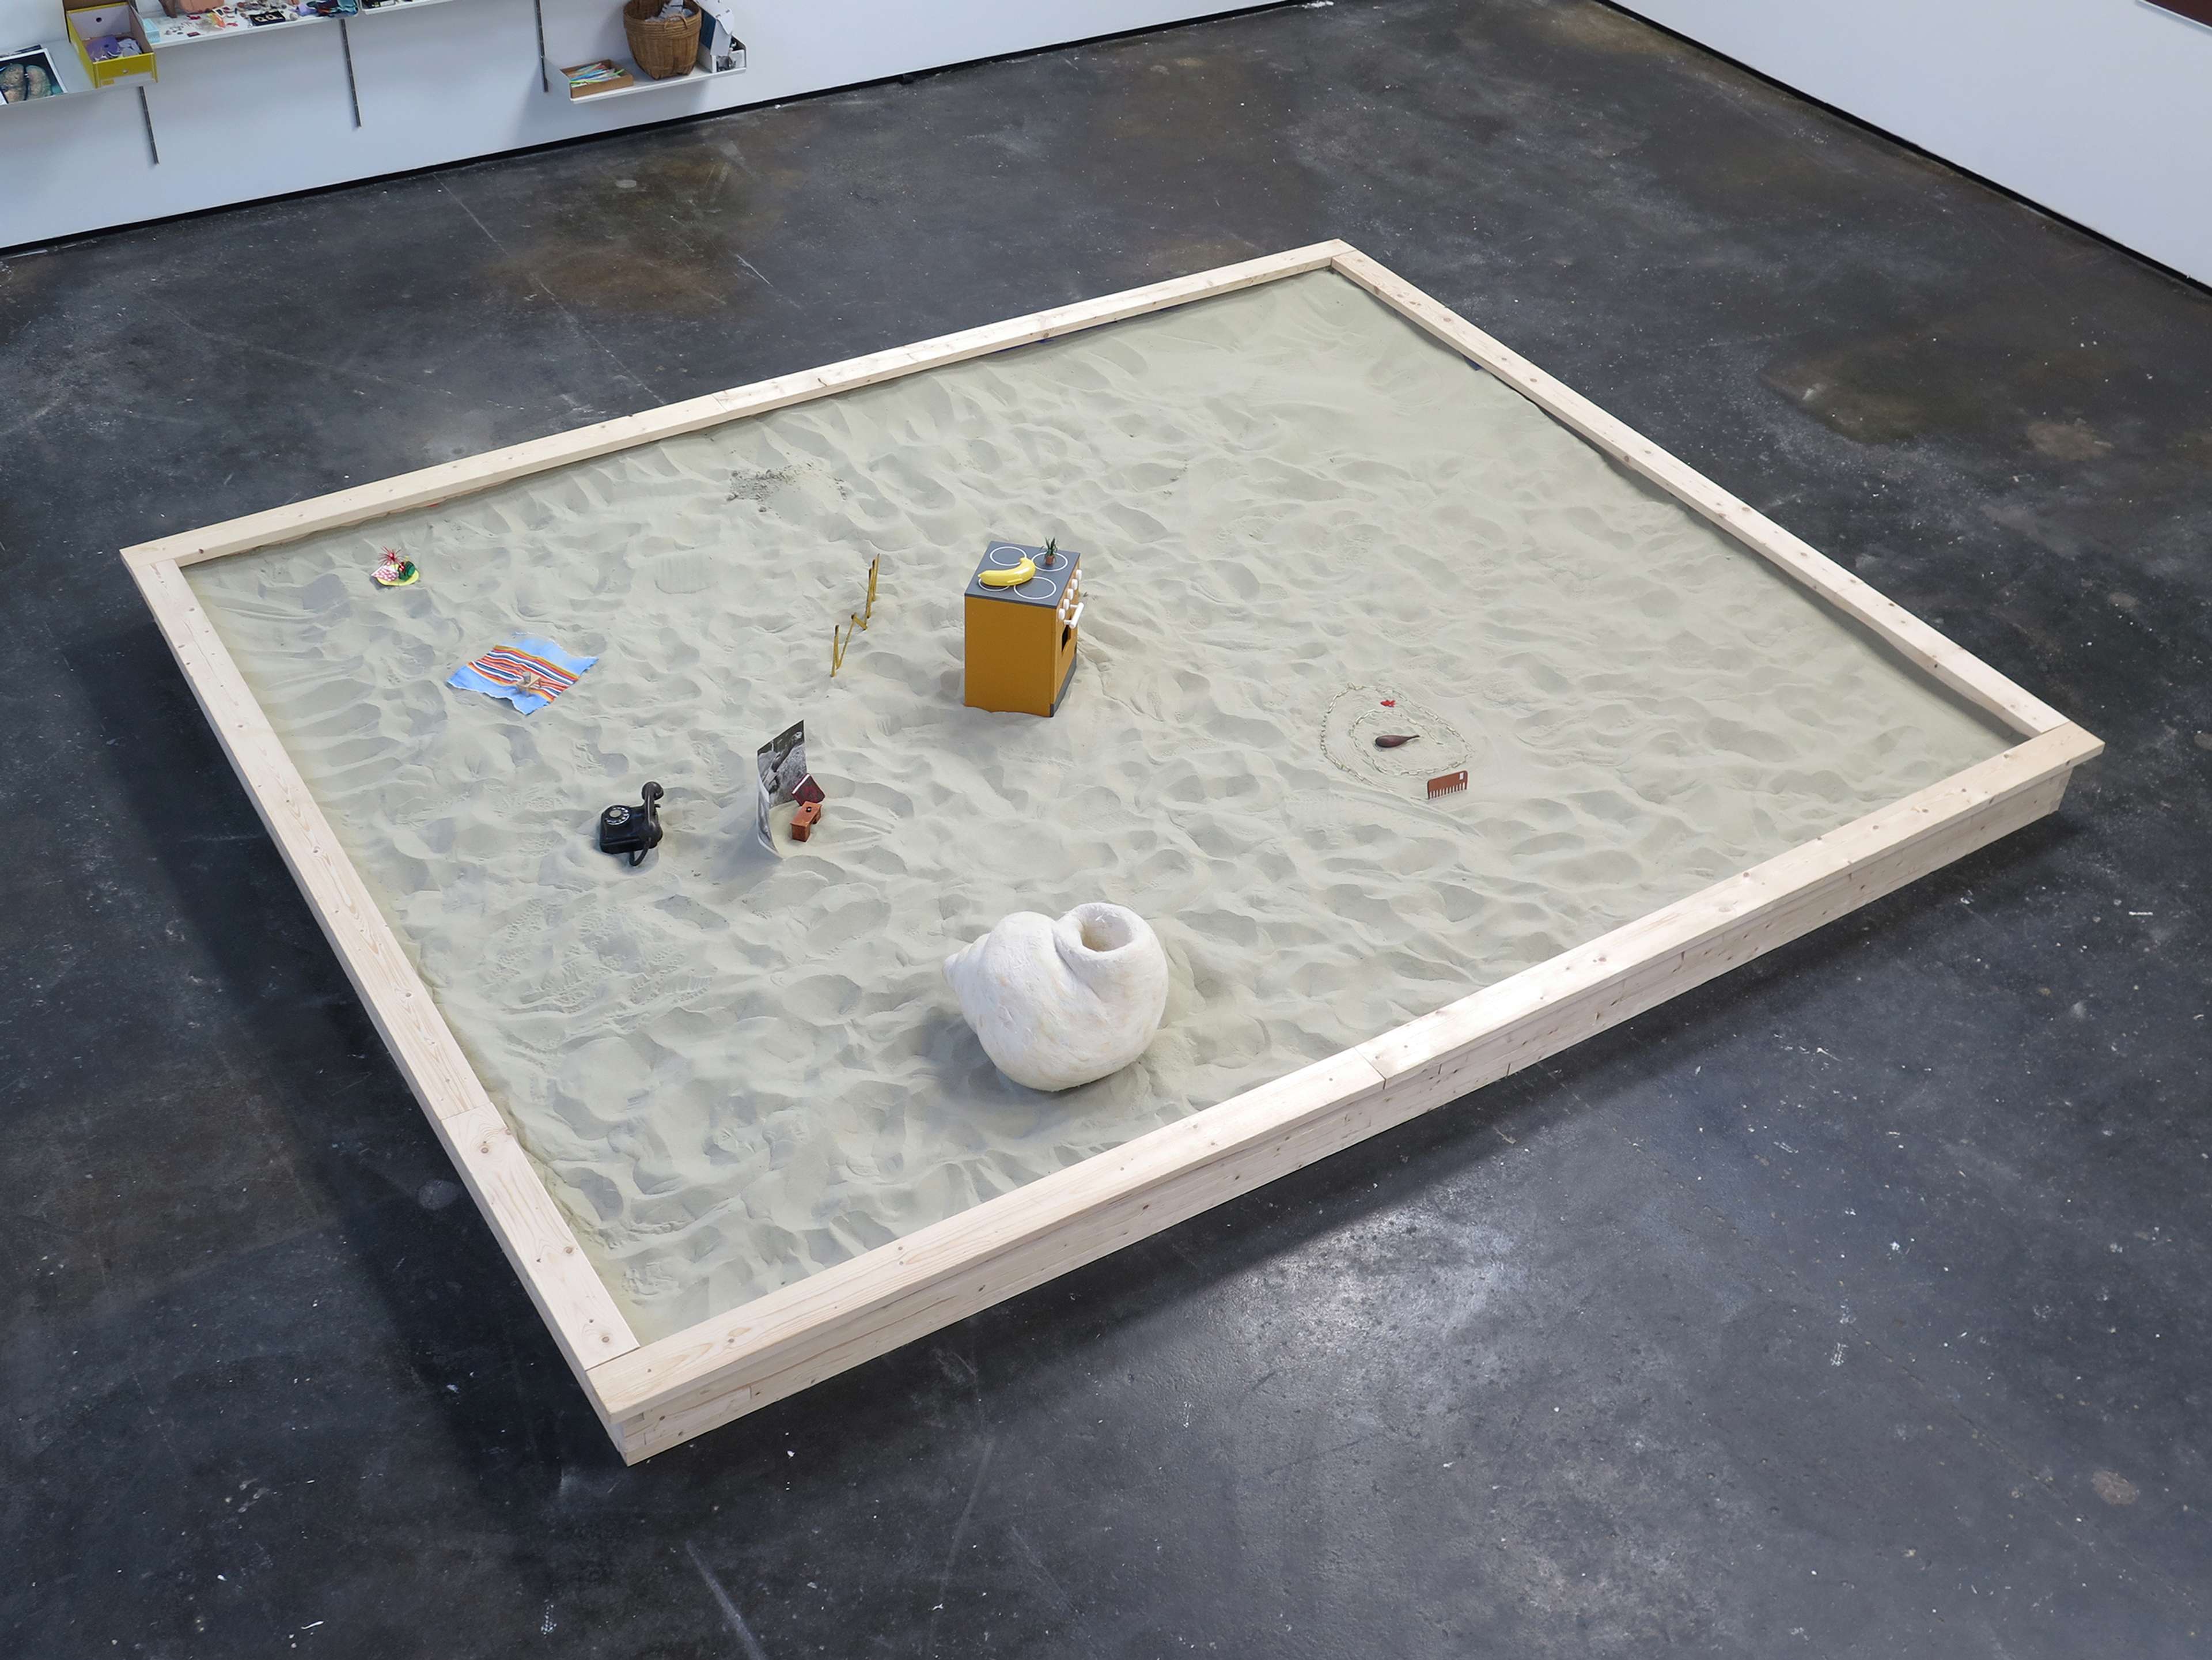 Together with Mirthe Berentsen. 

Inspired by sandplay therapy, this installation invites the visitor to select (or not) and object from the collection and place it somewhere in the sandbox.